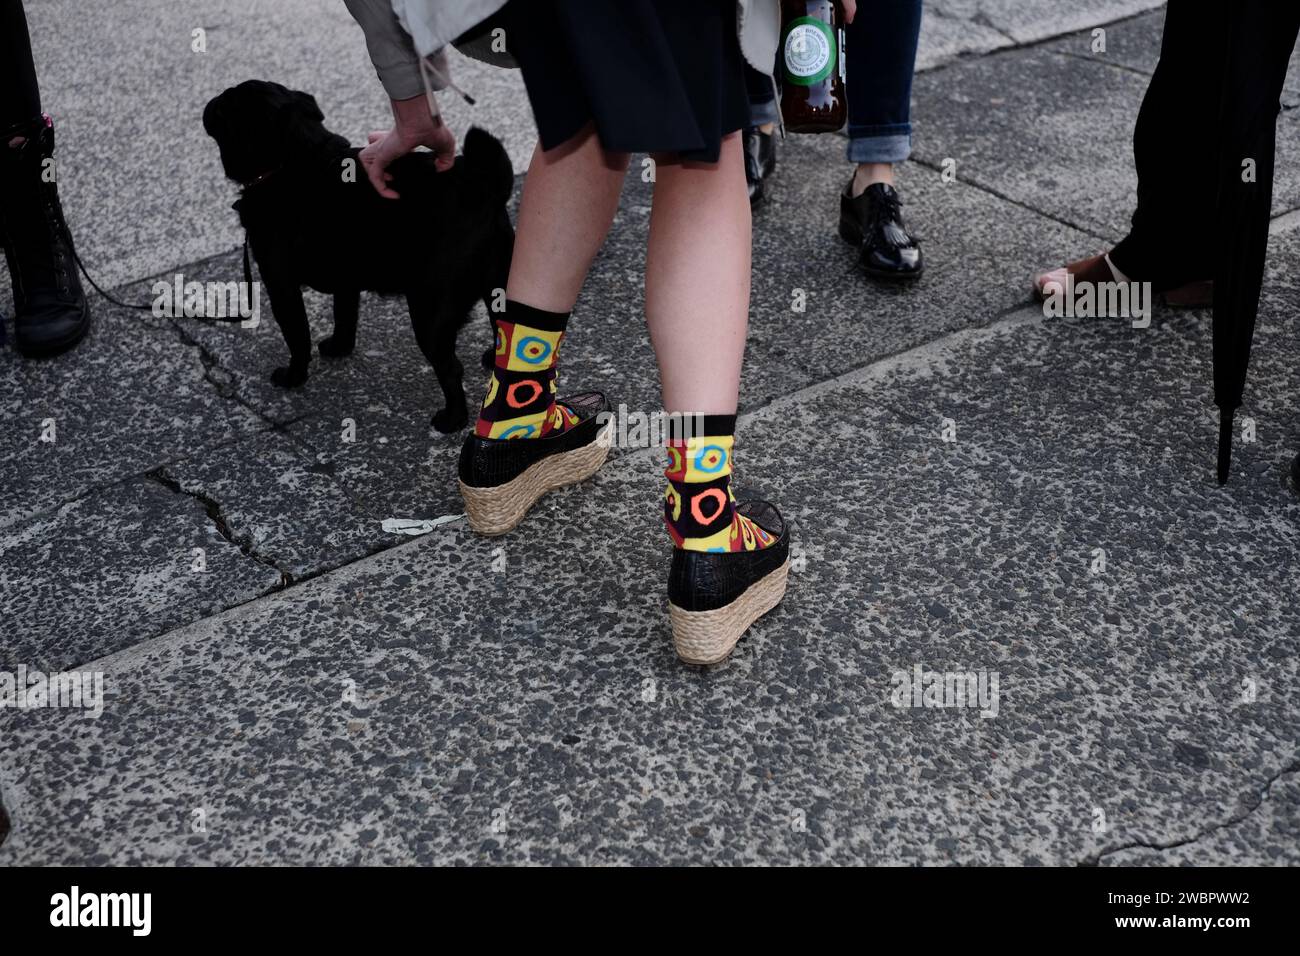 Espadrille wedge slip-ons with bright, circle and square multi-coloured socks, legs and shoes, friends, a black pug dog on a concrete pavement Stock Photo